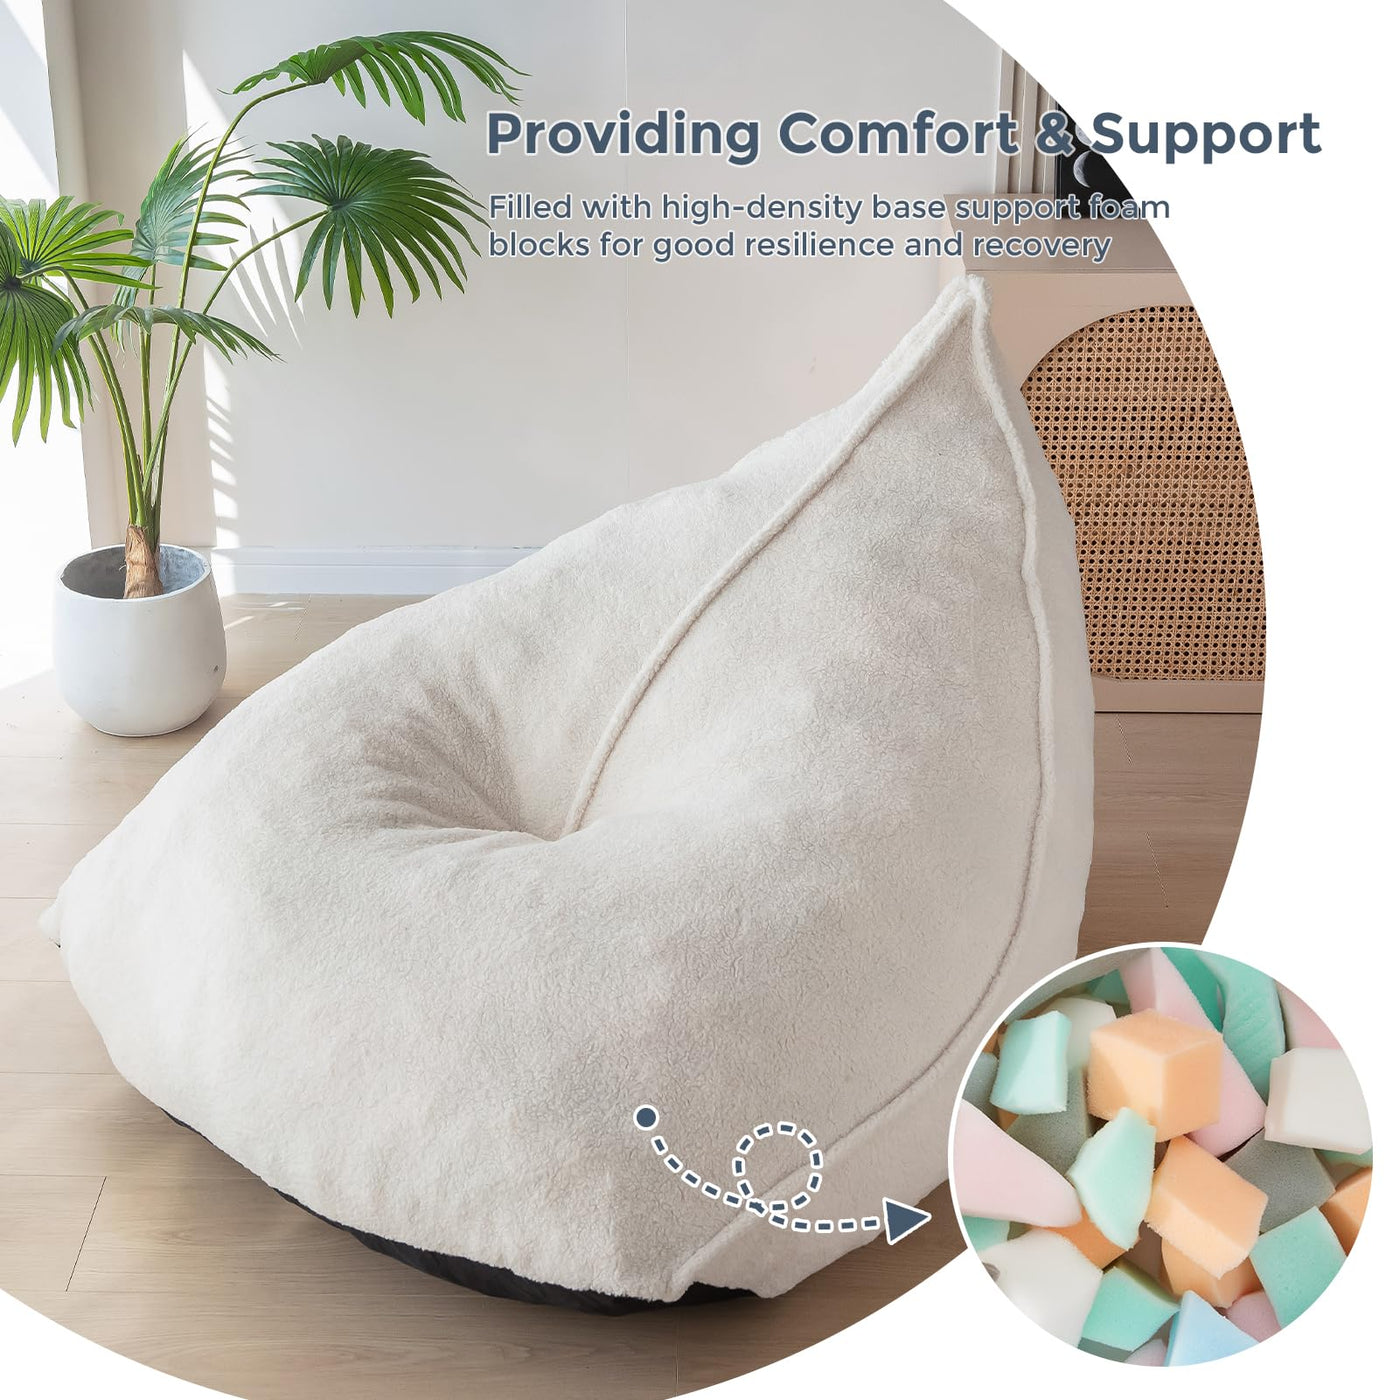 MAXYOYO Bean Bag Chairs for Adult, Giant Bean Bag Couch with Filler, Shaggy-beige